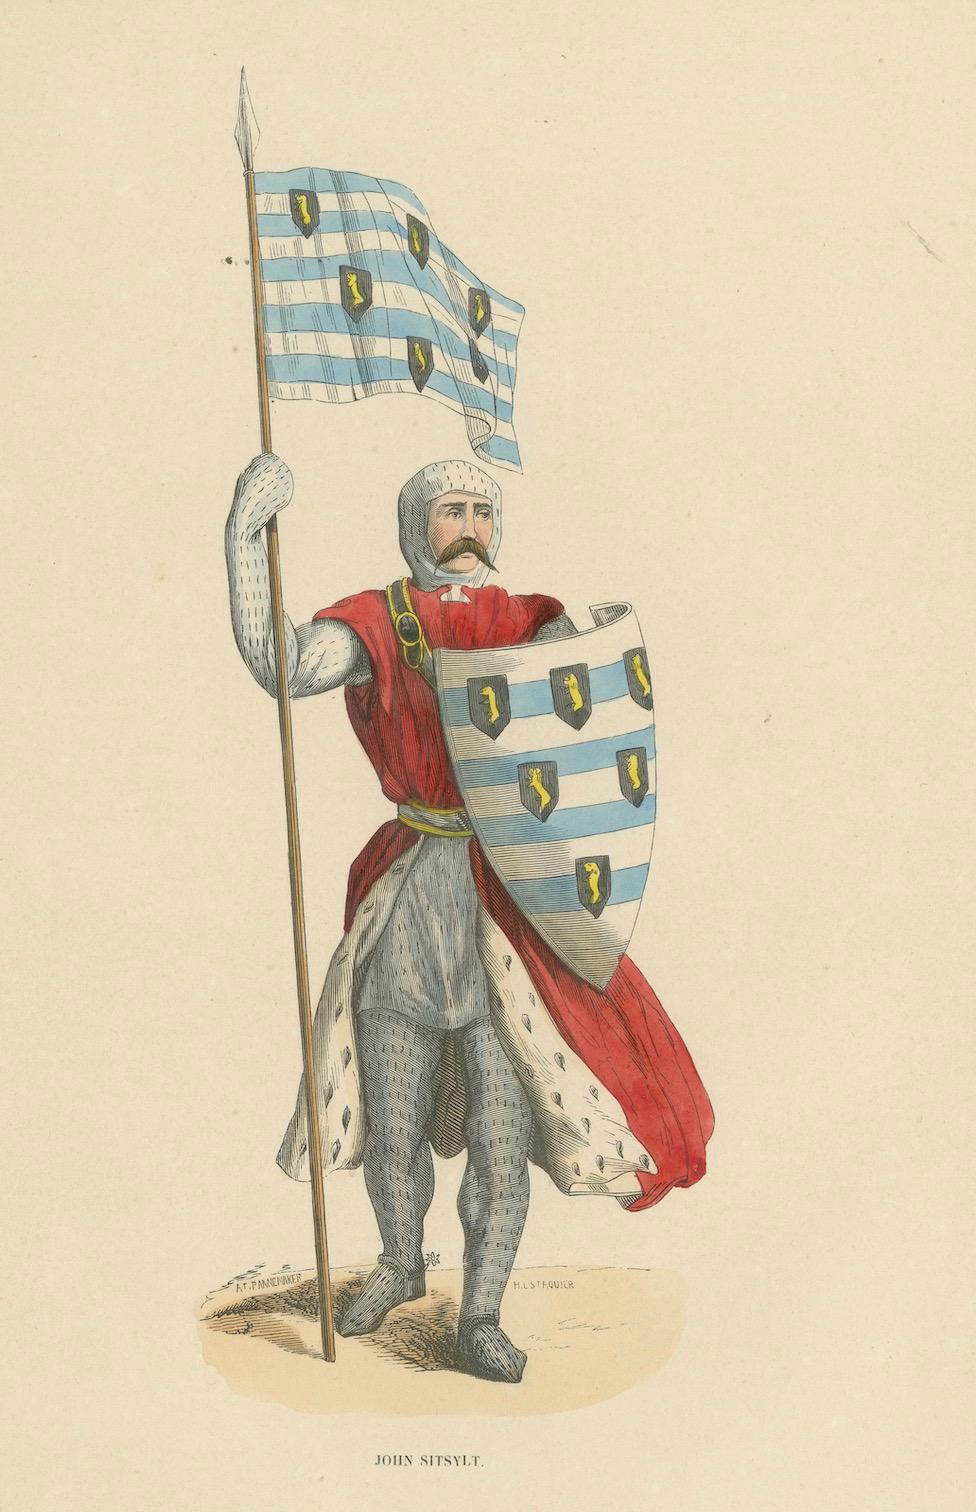 John Sitsylt, the Heraldic Knight in an Original Hand-Colored Lithograph of 1847 For Sale 4